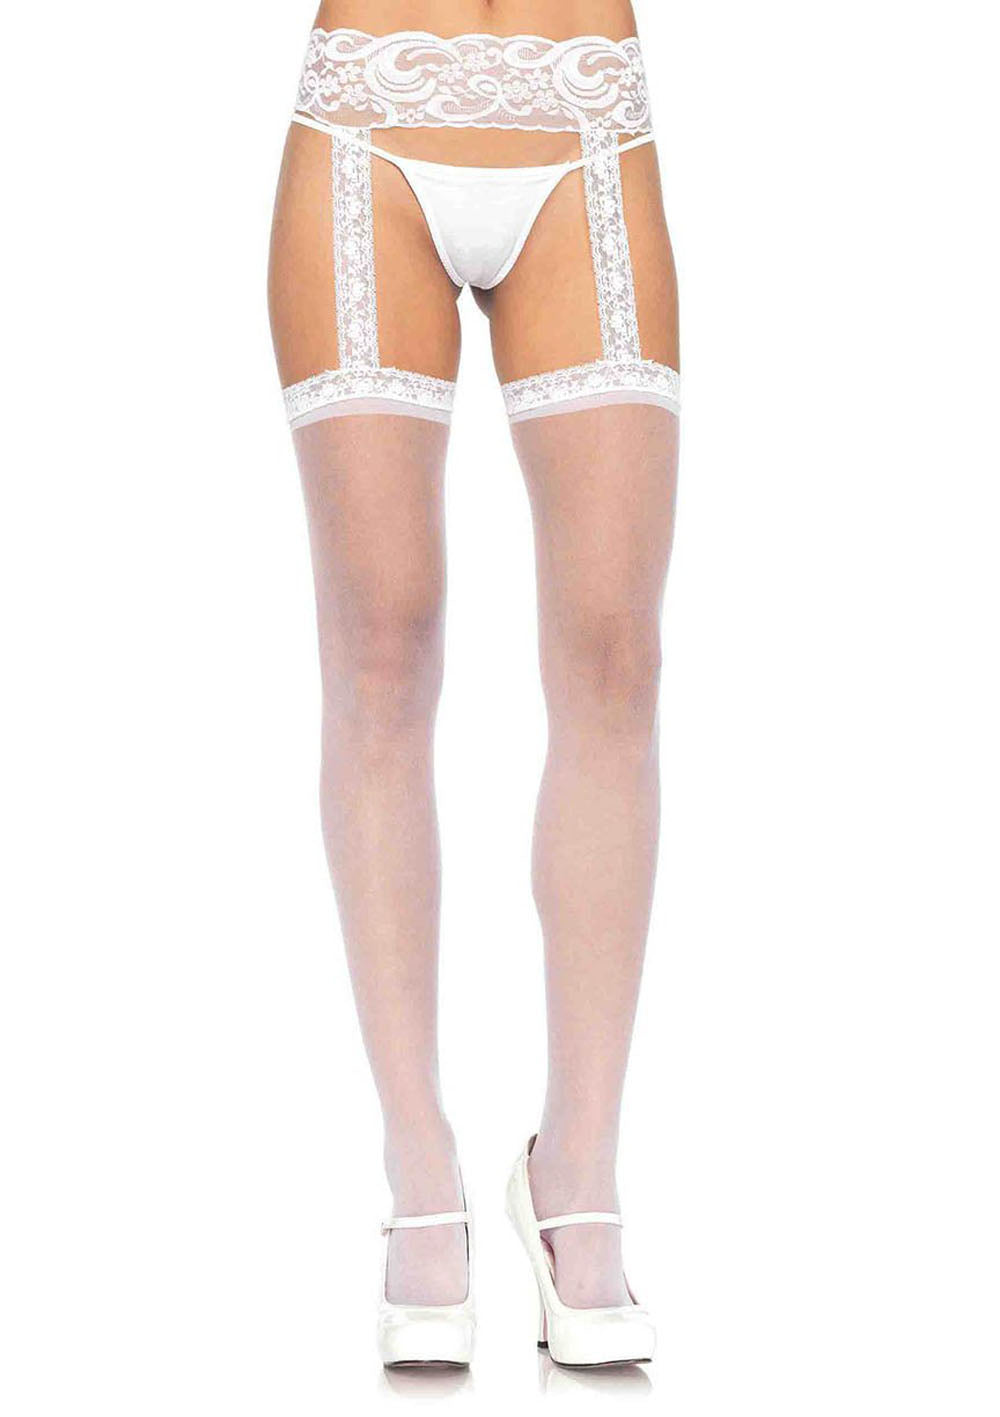 Sheer Thigh Highs - One Size - White